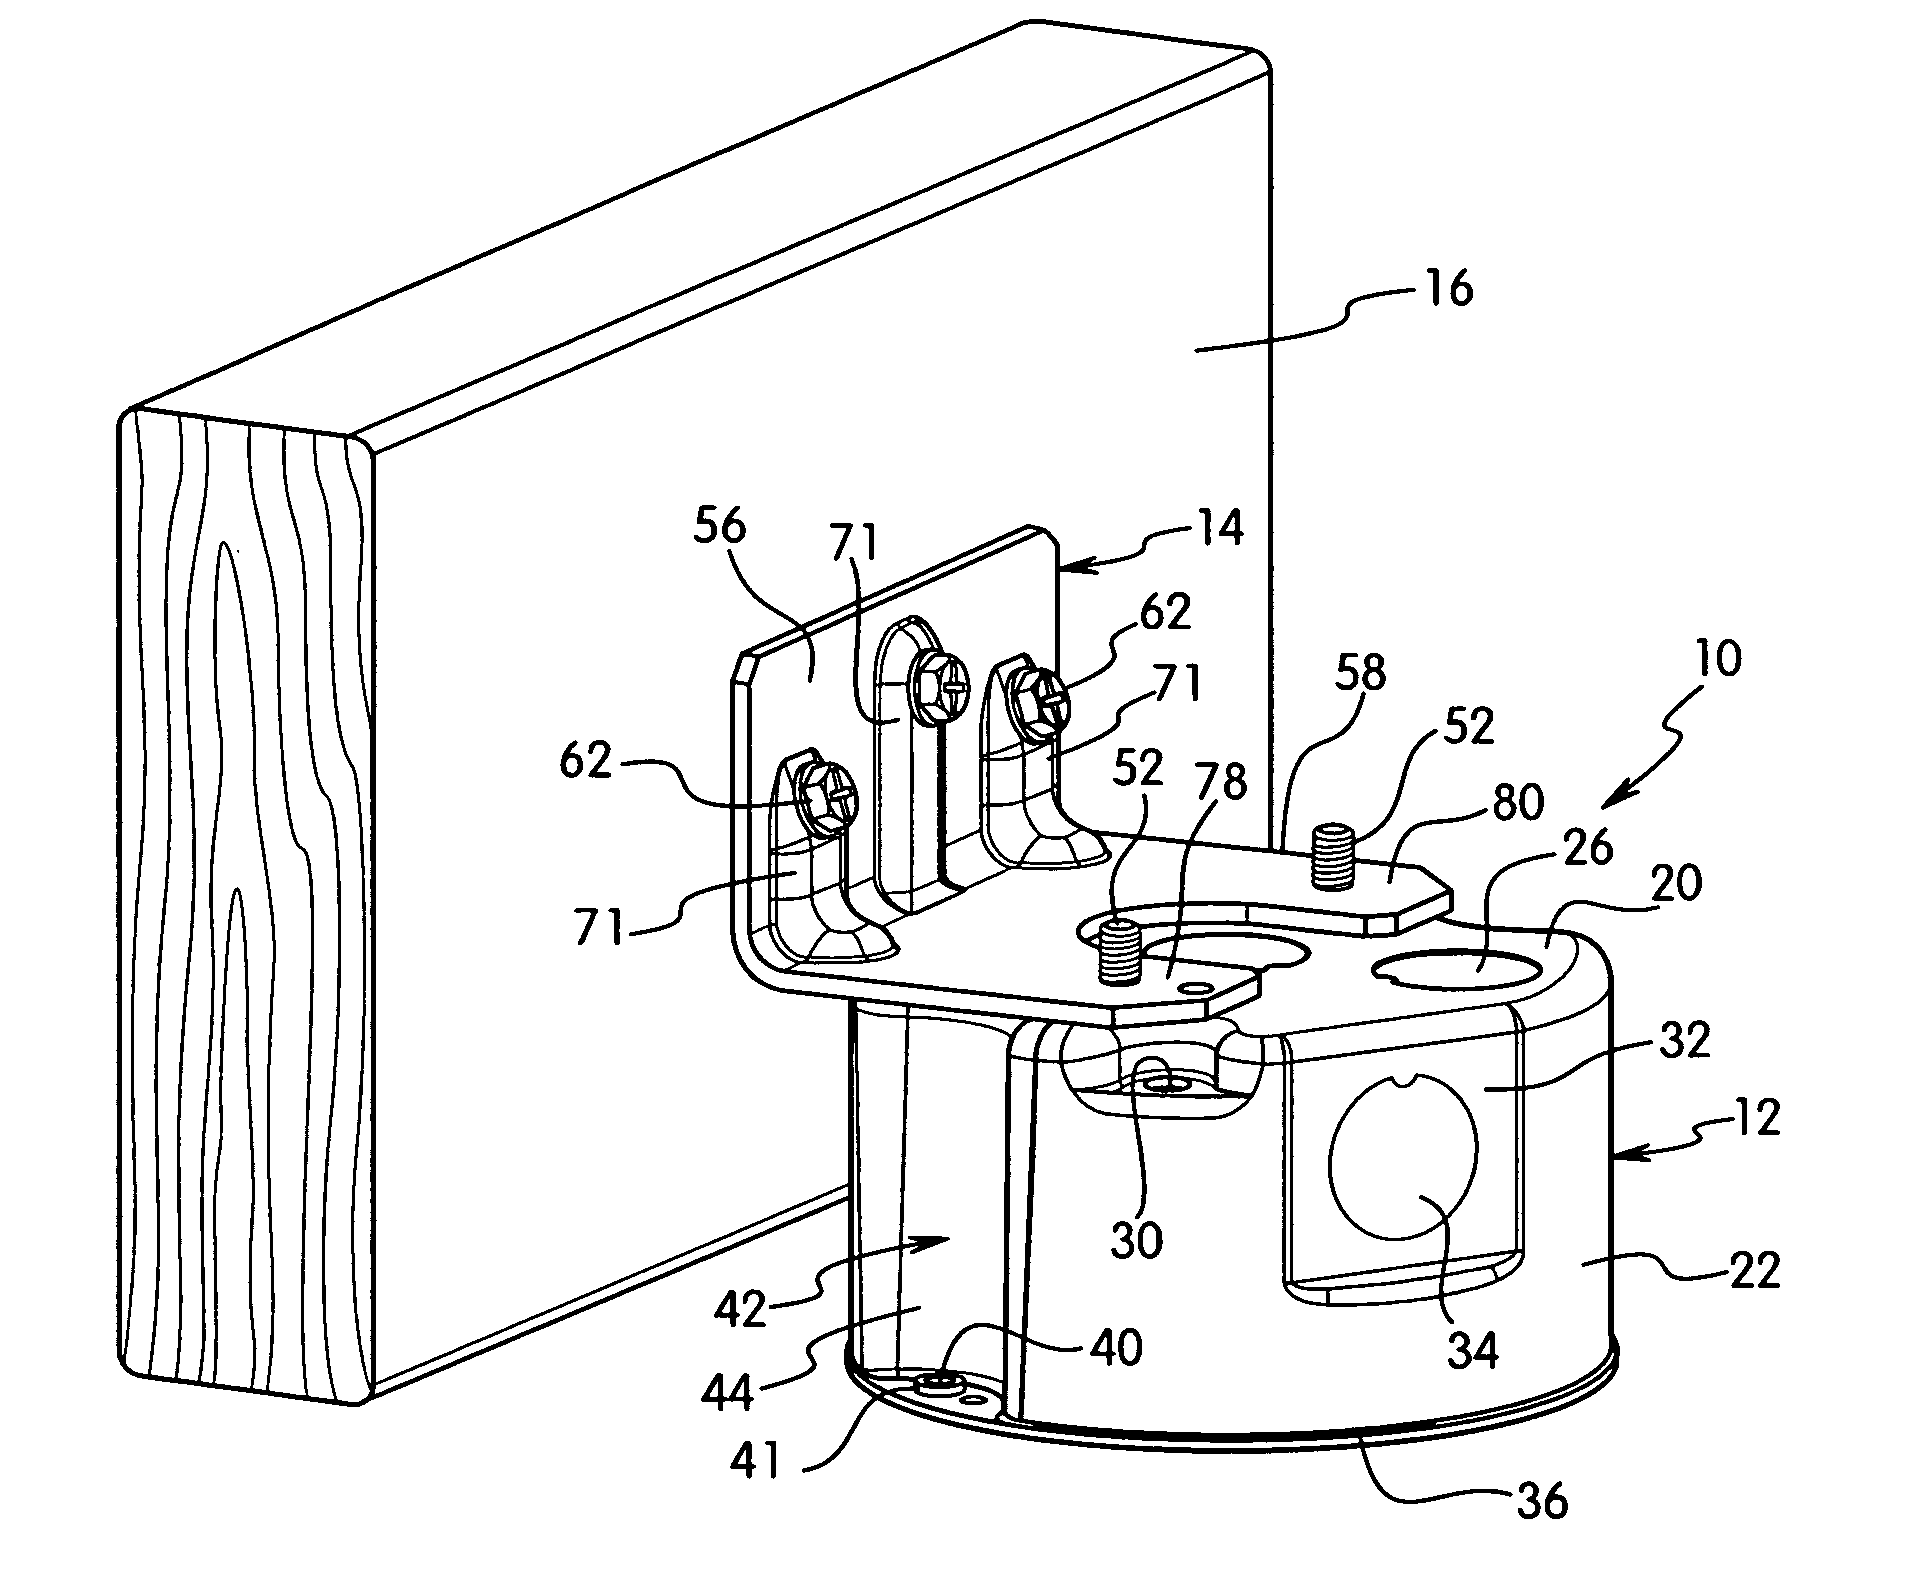 Electrical box having sight window and mounting assembly